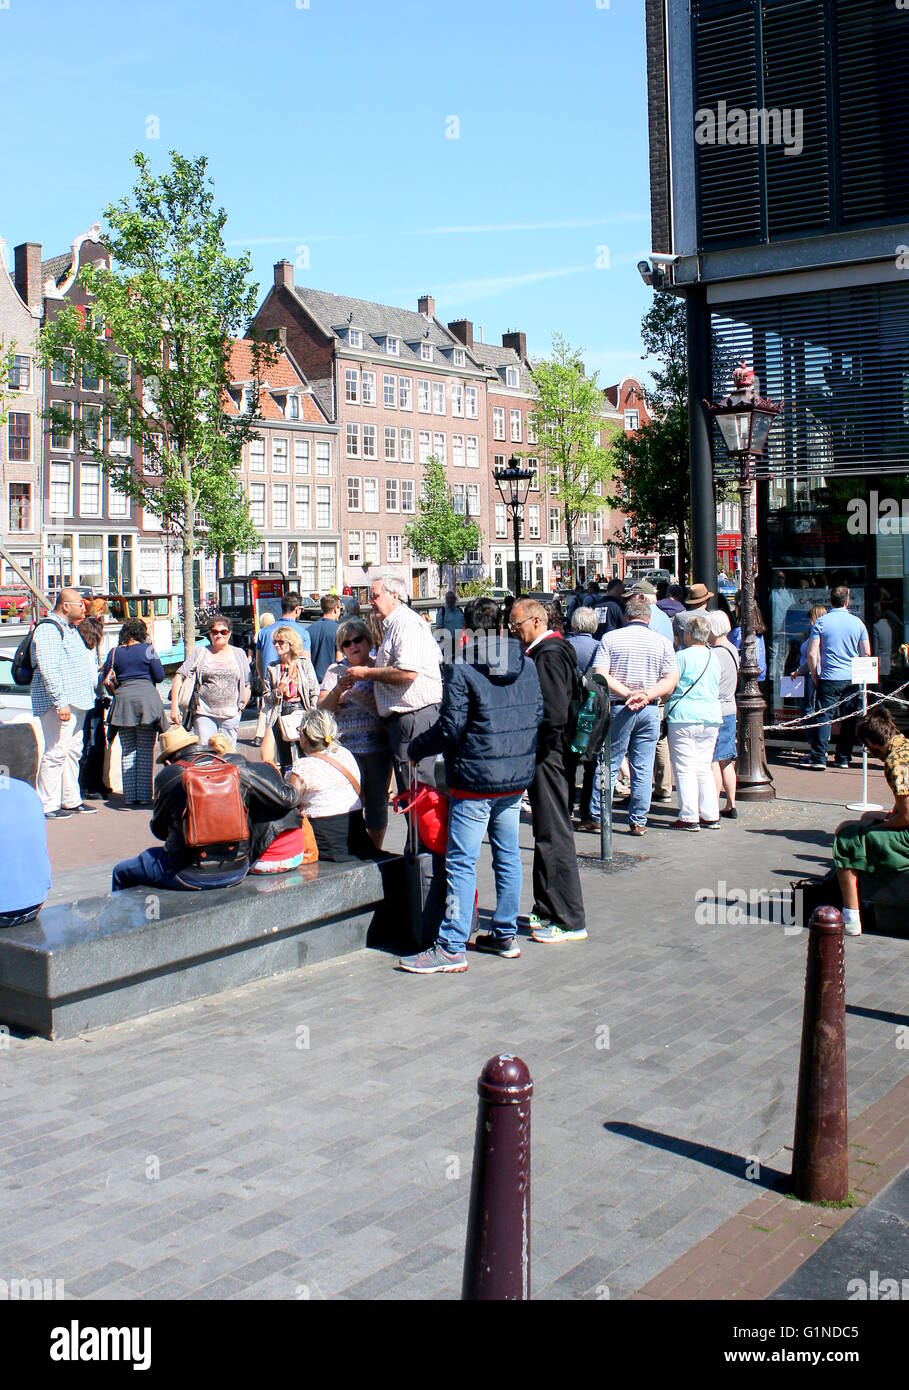 Group of foreign  tourists waiting to enter the Anne Frankhuis - Anne Frank Museum, Prinsengracht canal, Amsterdam. Stock Photo